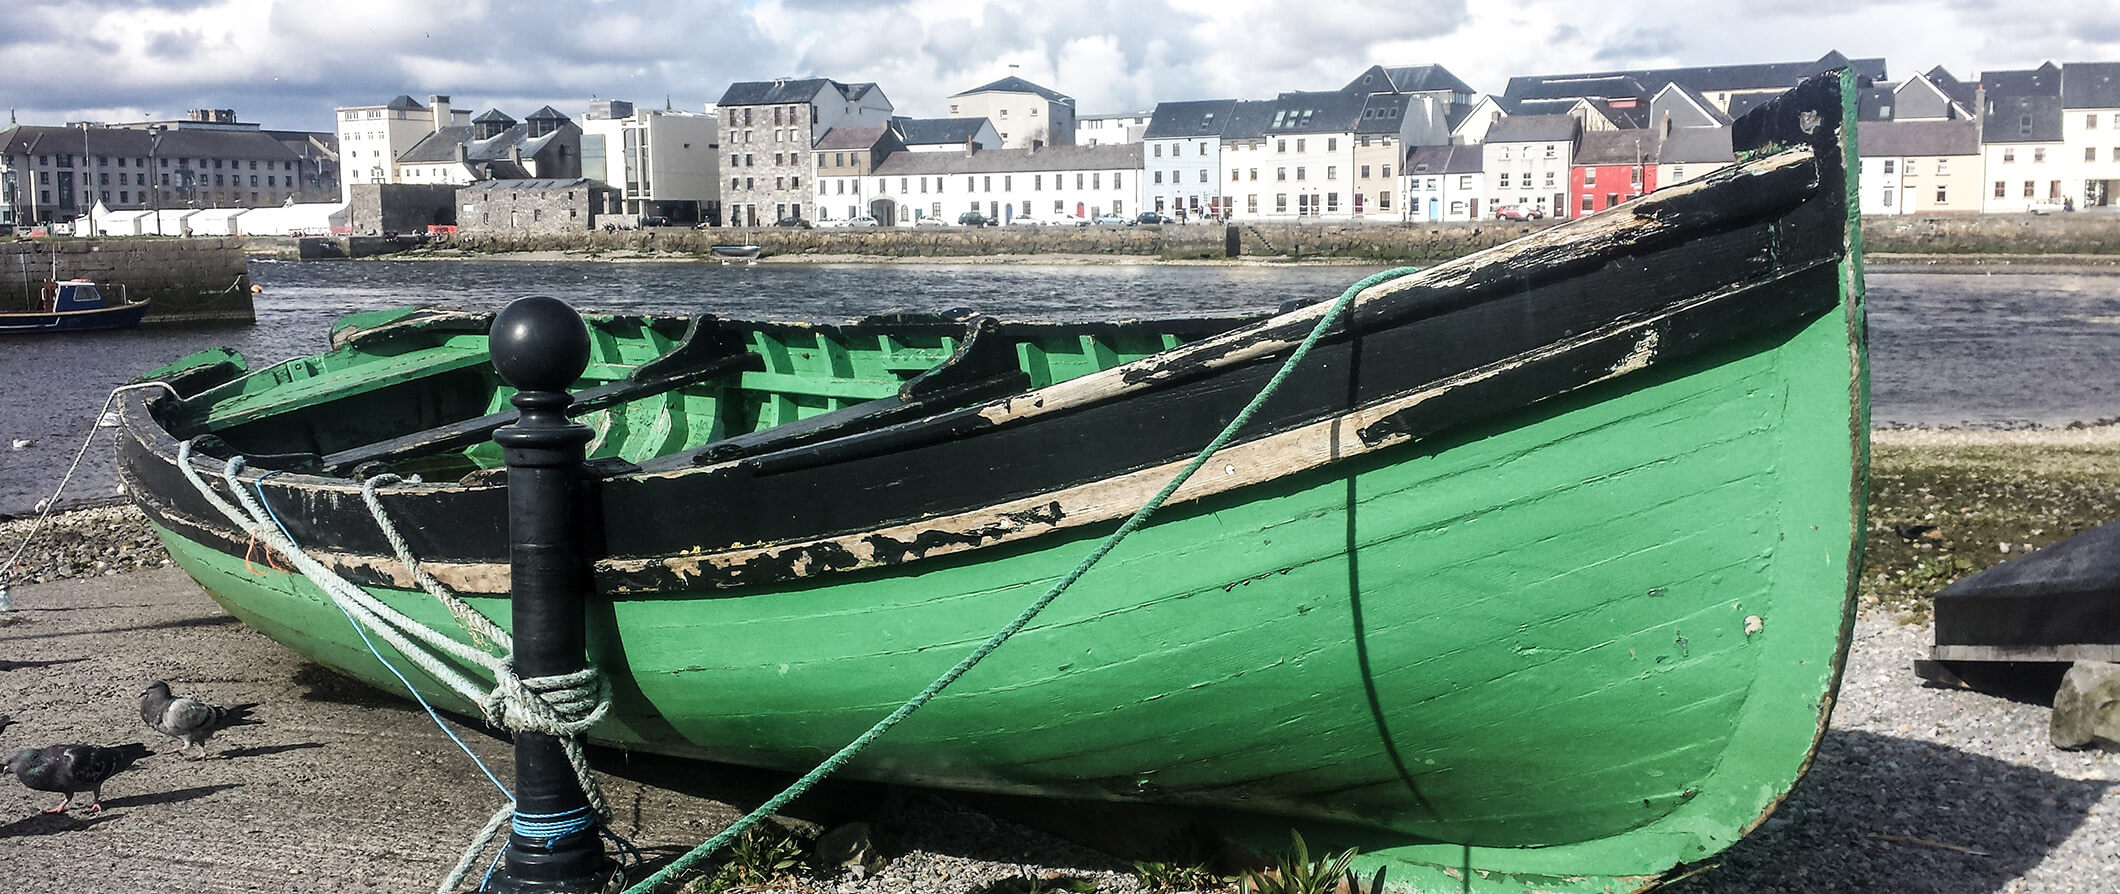 a green boat tied up next to a river in Galway Ireland